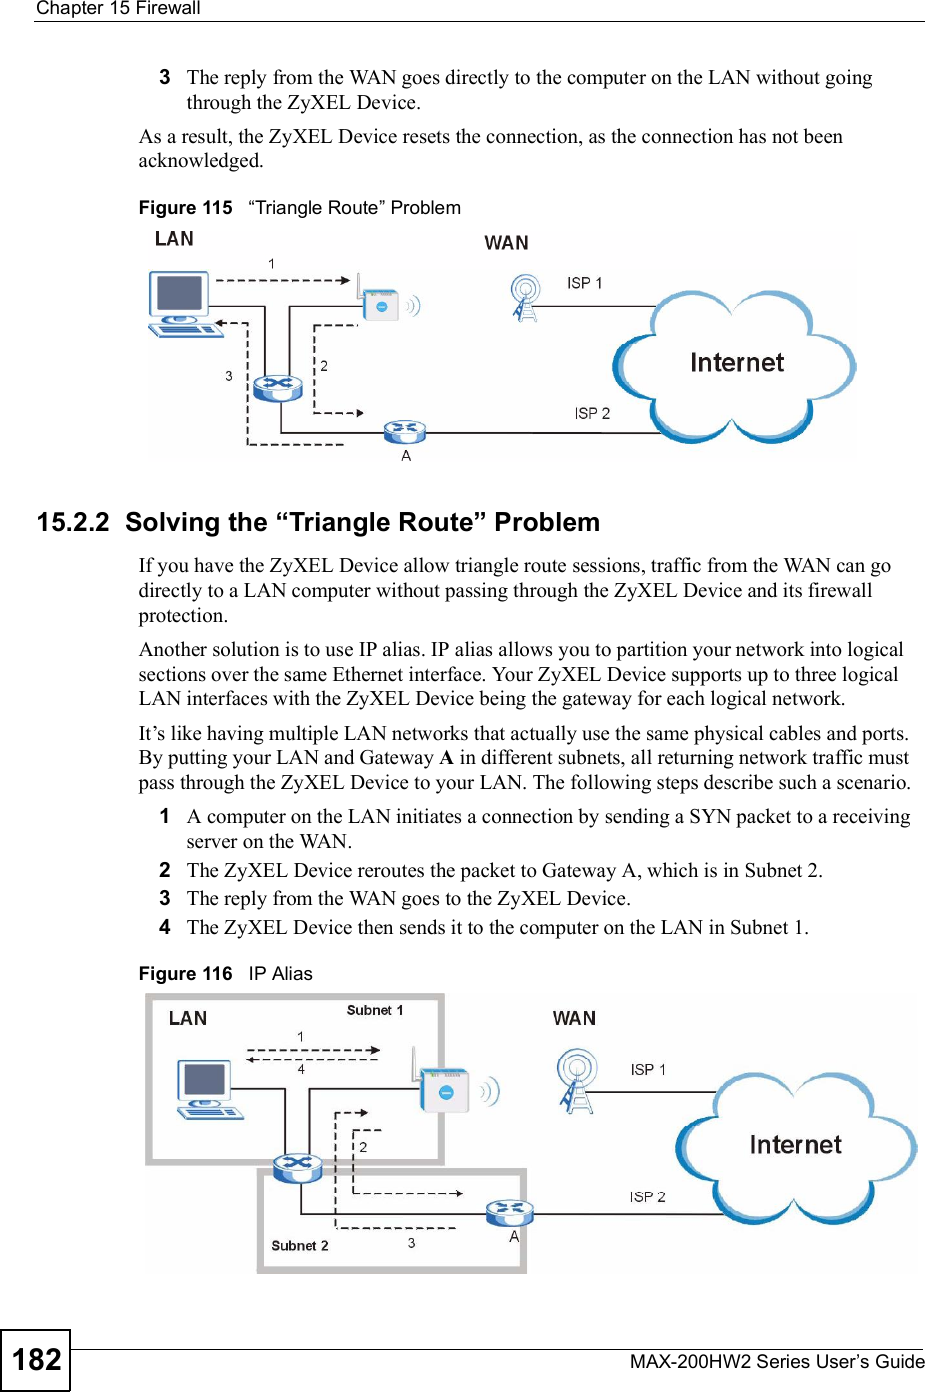 Chapter 15FirewallMAX-200HW2 Series User s Guide1823The reply from the WAN goes directly to the computer on the LAN without going through the ZyXEL Device. As a result, the ZyXEL Device resets the connection, as the connection has not been acknowledged.Figure 115   !Triangle Route&quot; Problem15.2.2  Solving the &quot;Triangle Route# ProblemIf you have the ZyXEL Device allow triangle route sessions, traffic from the WAN can go directly to a LAN computer without passing through the ZyXEL Device and its firewall protection. Another solution is to use IP alias. IP alias allows you to partition your network into logical sections over the same Ethernet interface. Your ZyXEL Device supports up to three logical LAN interfaces with the ZyXEL Device being the gateway for each logical network. It!s like having multiple LAN networks that actually use the same physical cables and ports. By putting your LAN and Gateway A in different subnets, all returning network traffic must pass through the ZyXEL Device to your LAN. The following steps describe such a scenario.1A computer on the LAN initiates a connection by sending a SYN packet to a receiving server on the WAN. 2The ZyXEL Devicereroutes the packet to Gateway A, which is in Subnet 2. 3The reply from the WAN goes to the ZyXEL Device. 4The ZyXEL Device then sends it to the computer on the LAN in Subnet 1.Figure 116   IP Alias